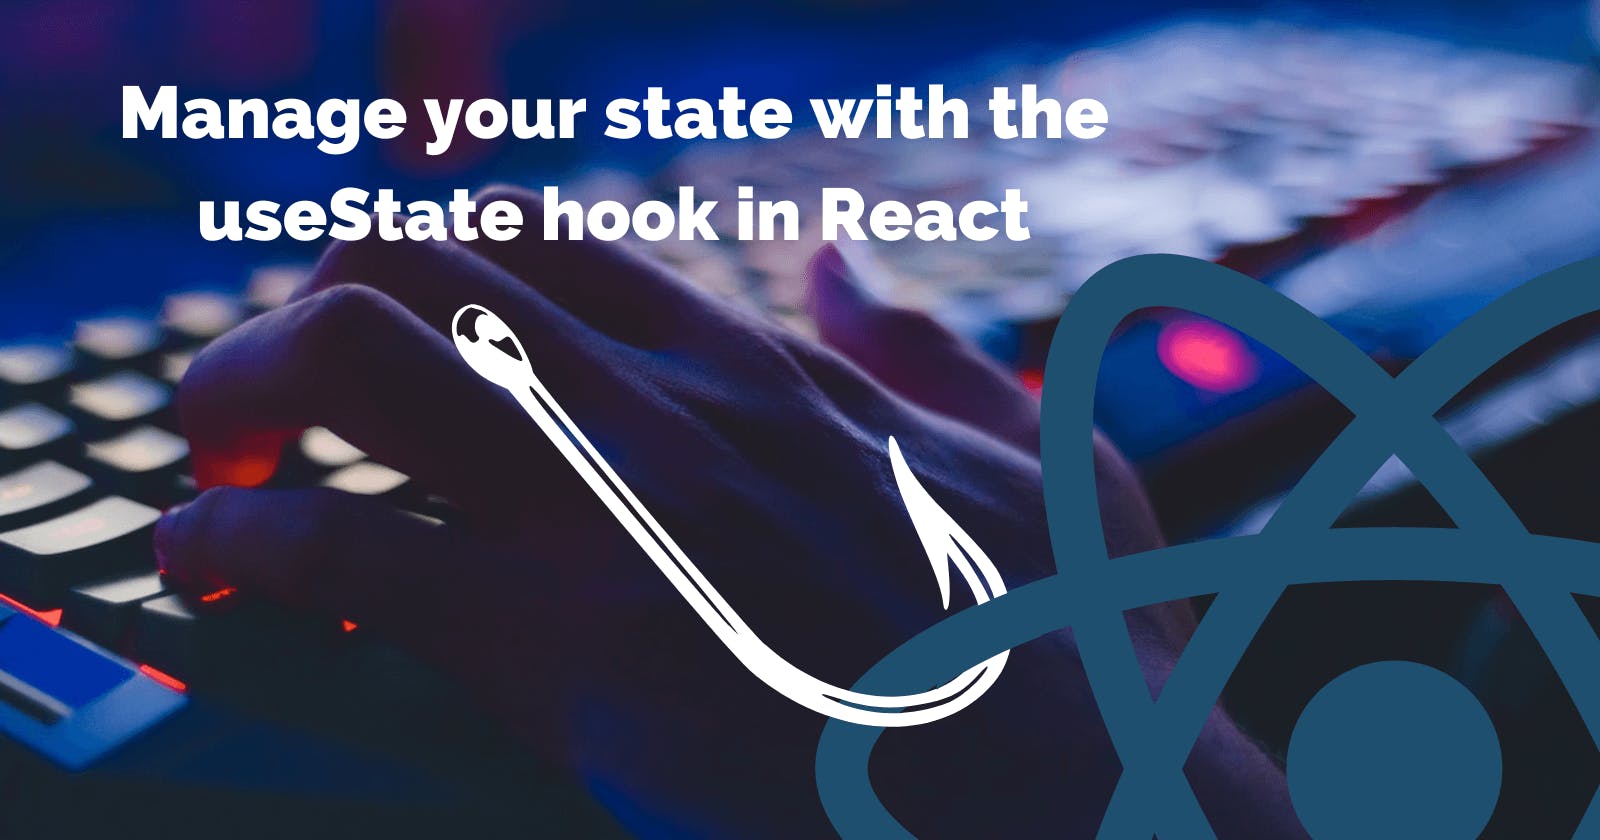 Manage your state with the useState hook in React